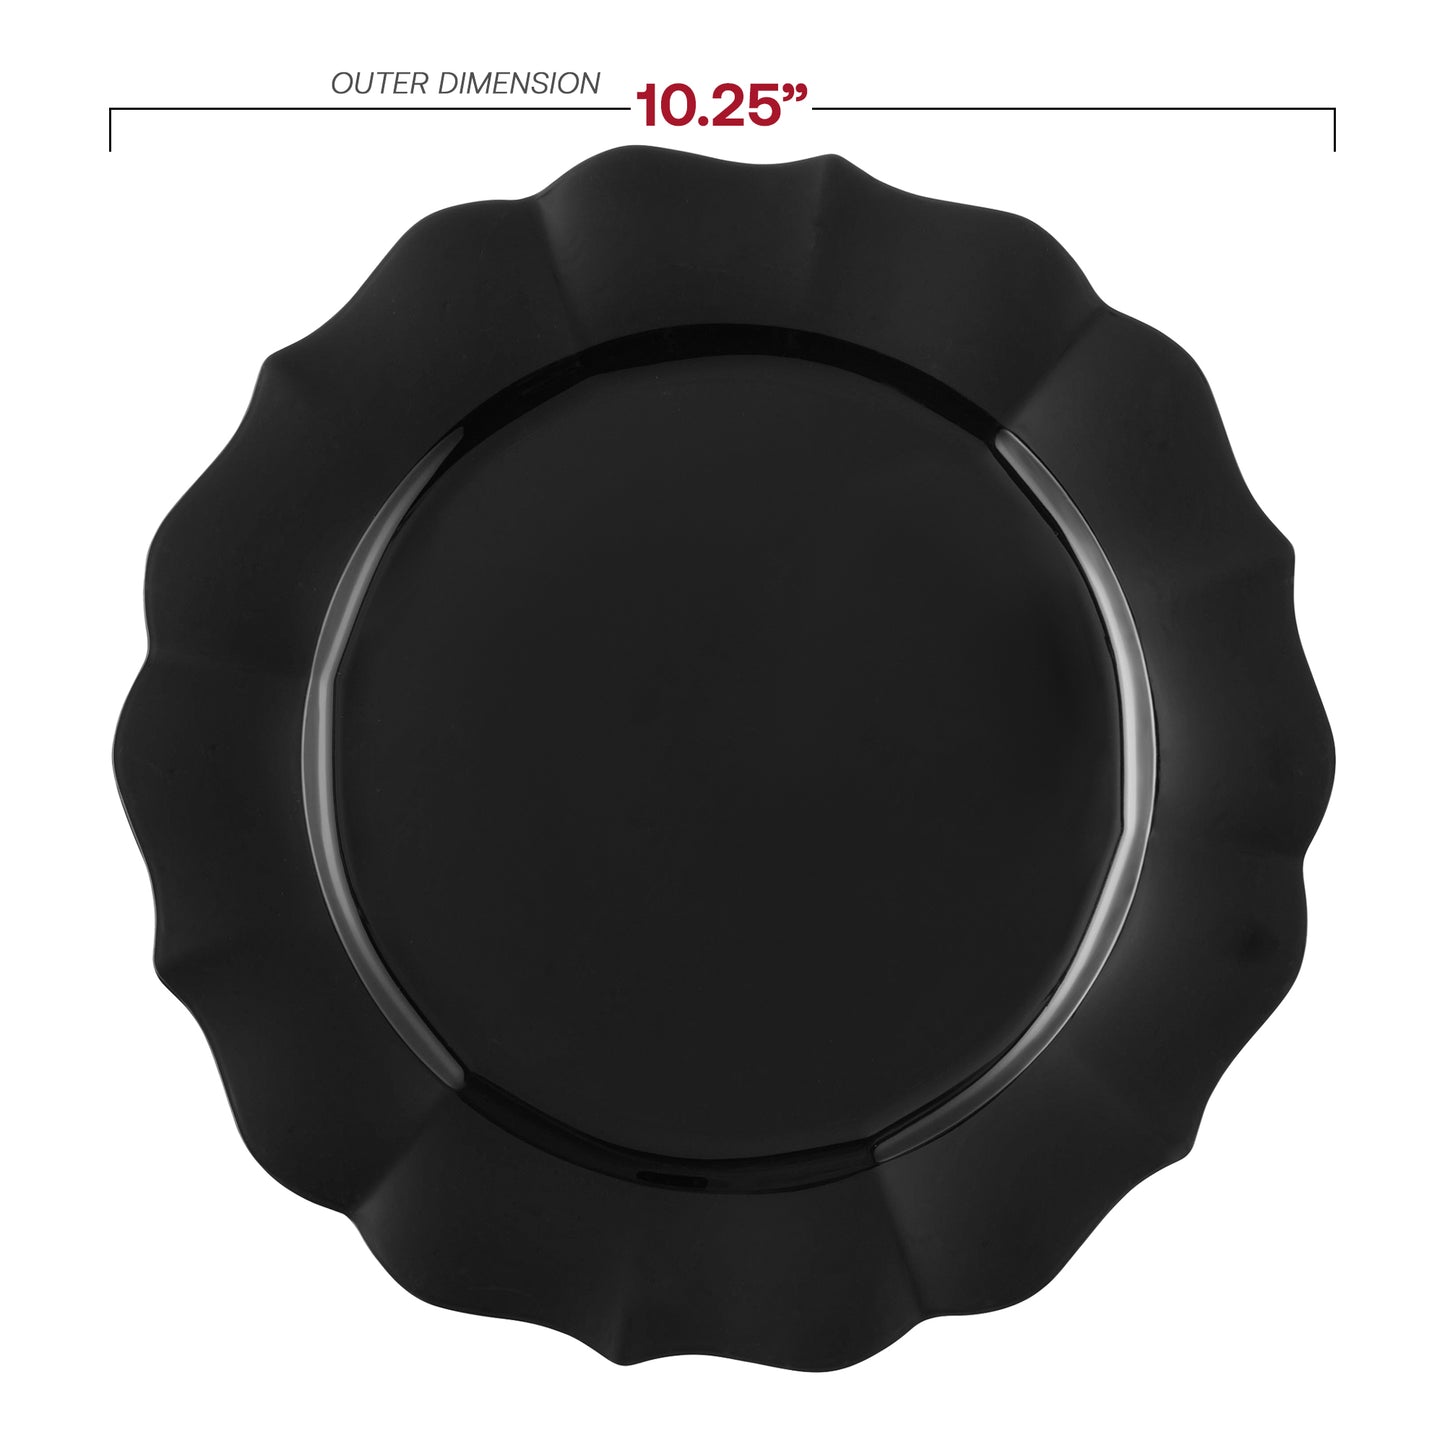 Black Round Lotus Disposable Plastic Dinner Plates (10.25") Dimension | The Kaya Collection